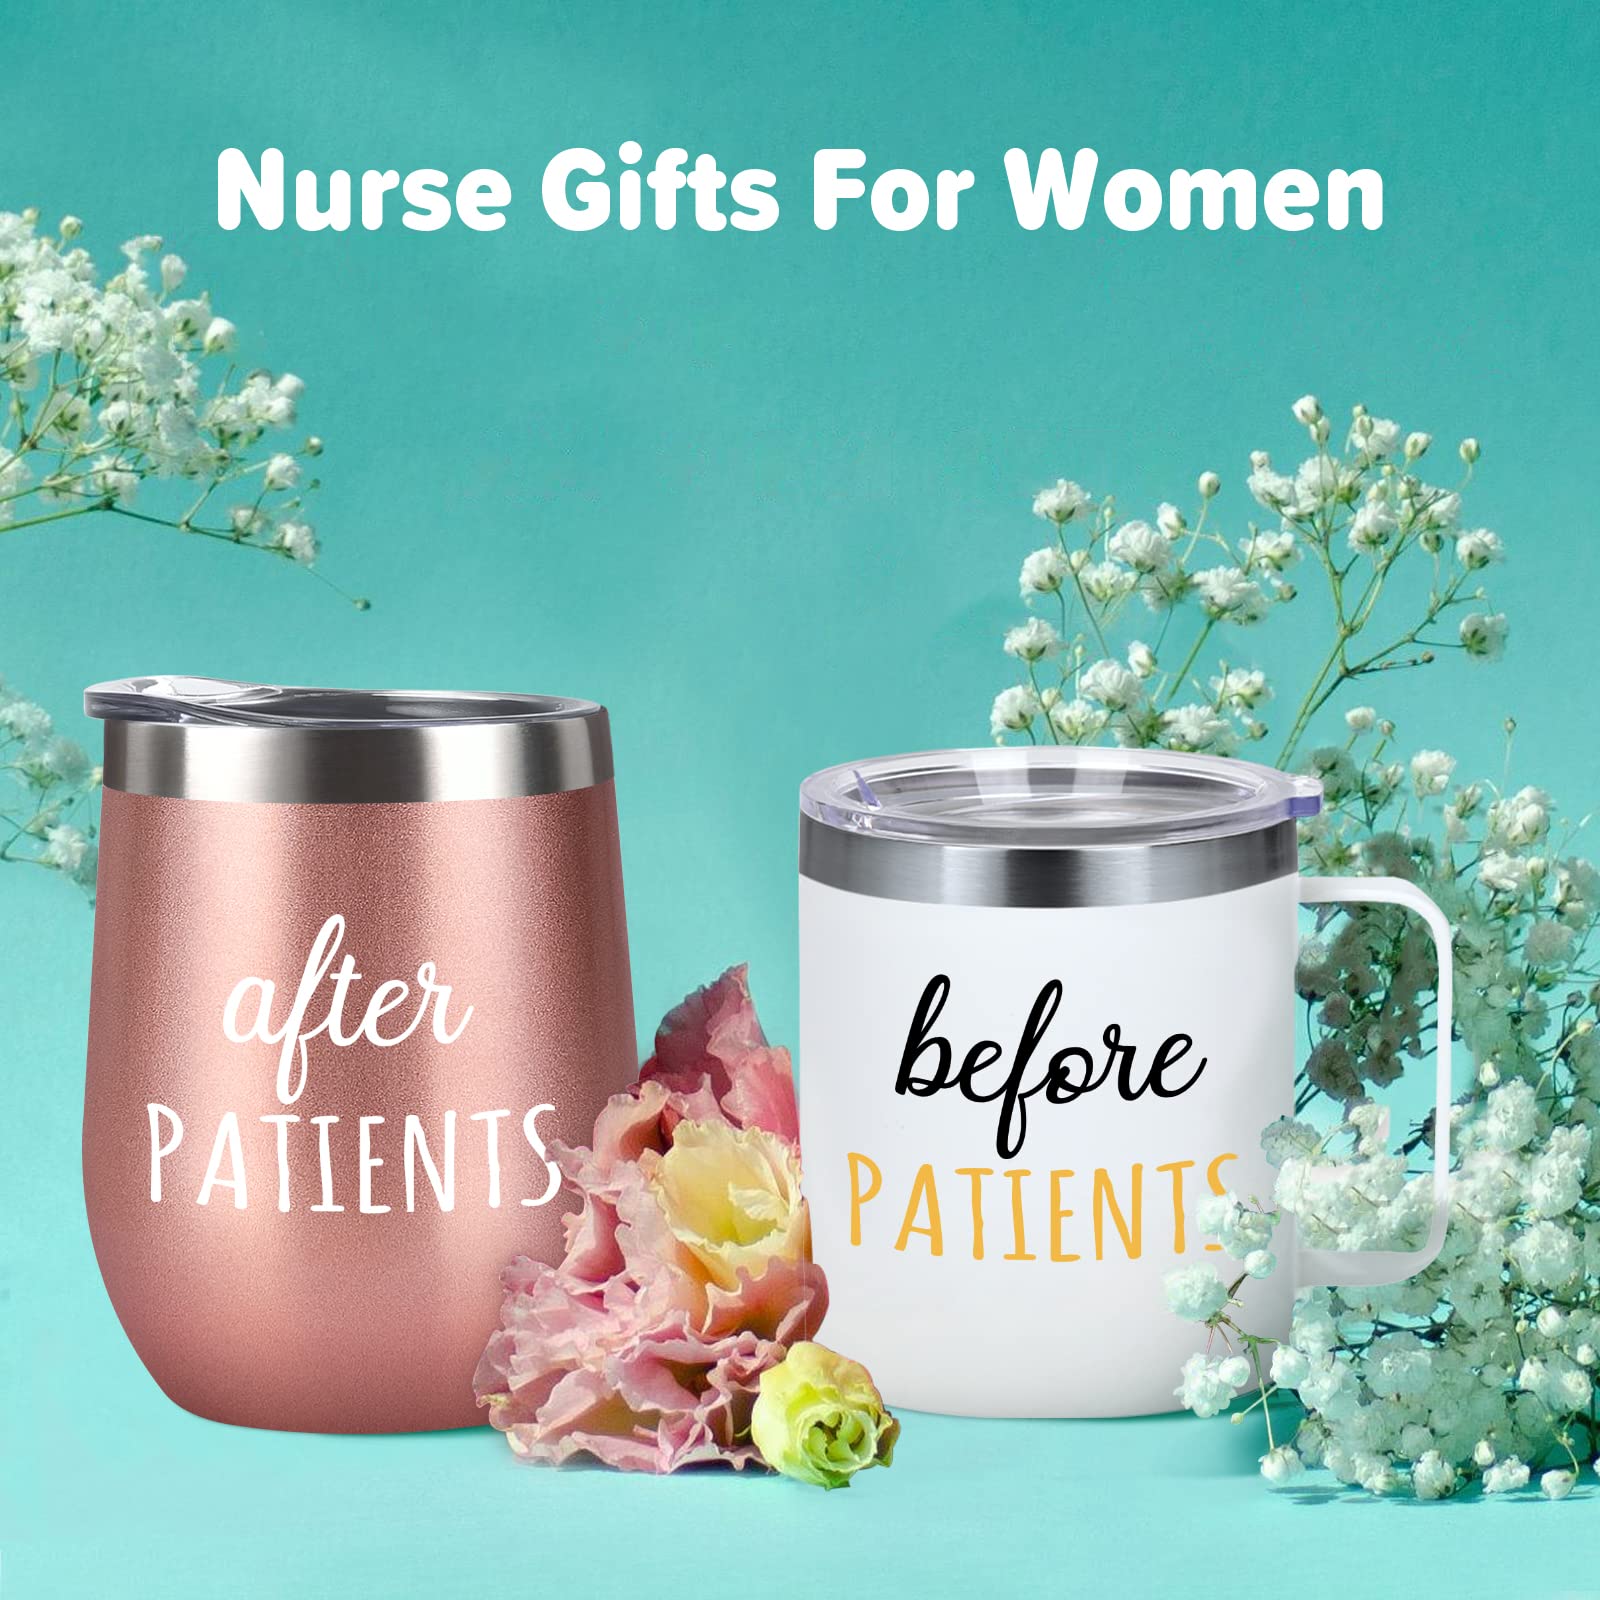 Gtmileo Nurse Gifts for Women, 12 oz Before Patients After Patients Stainless Steel Insulated Coffee Mug Tumbler Set, Nurse Week Appreciation Graduation Gifts for Nurse Practitioner Doctor Therapist